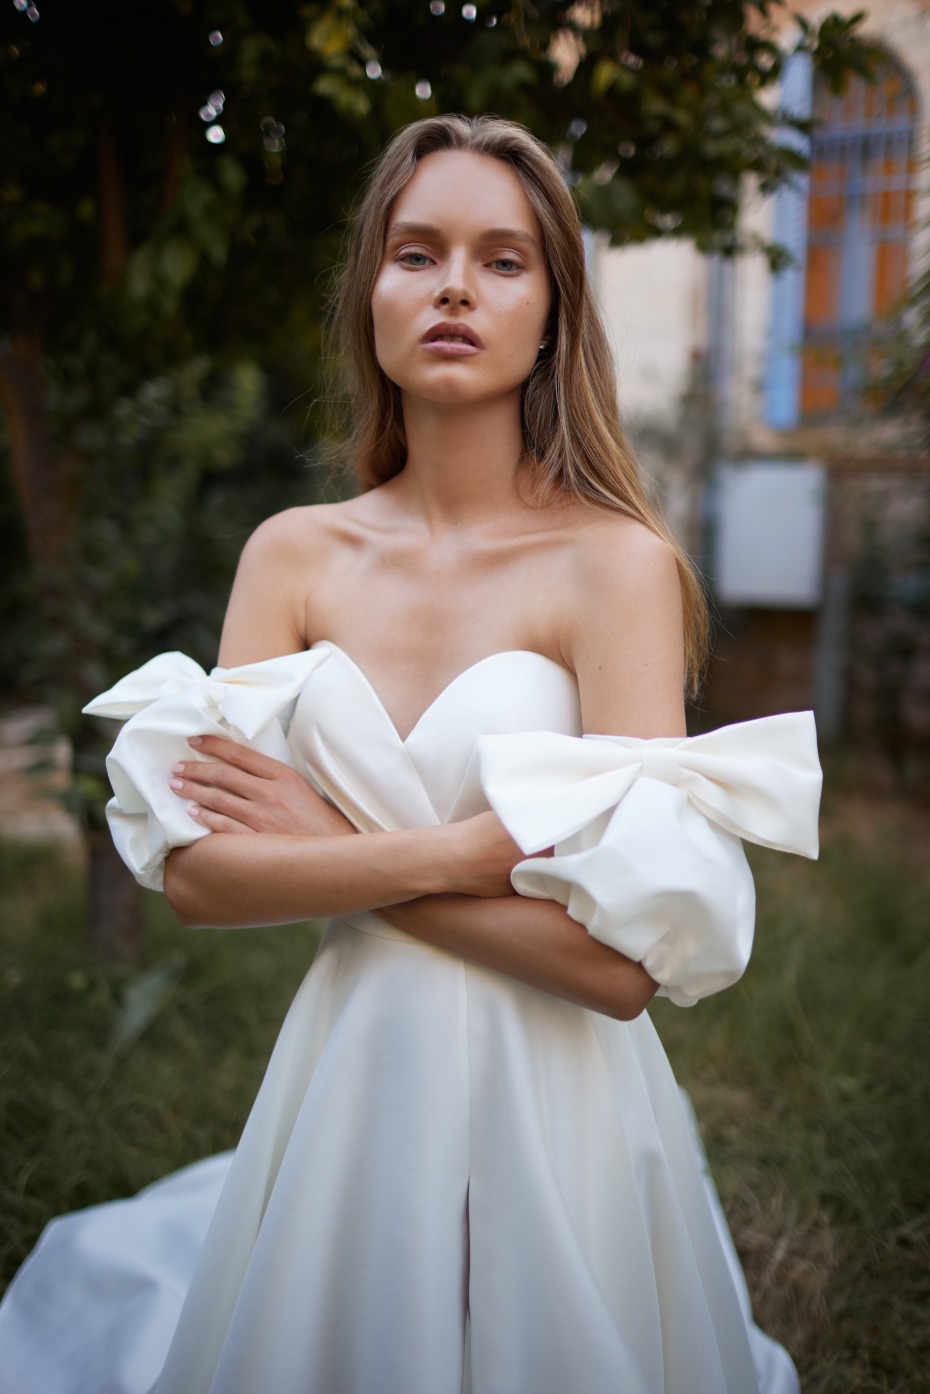 The Newest Pure Fleur Collection for Arava Polak Bridal Is True Beauty In Motion